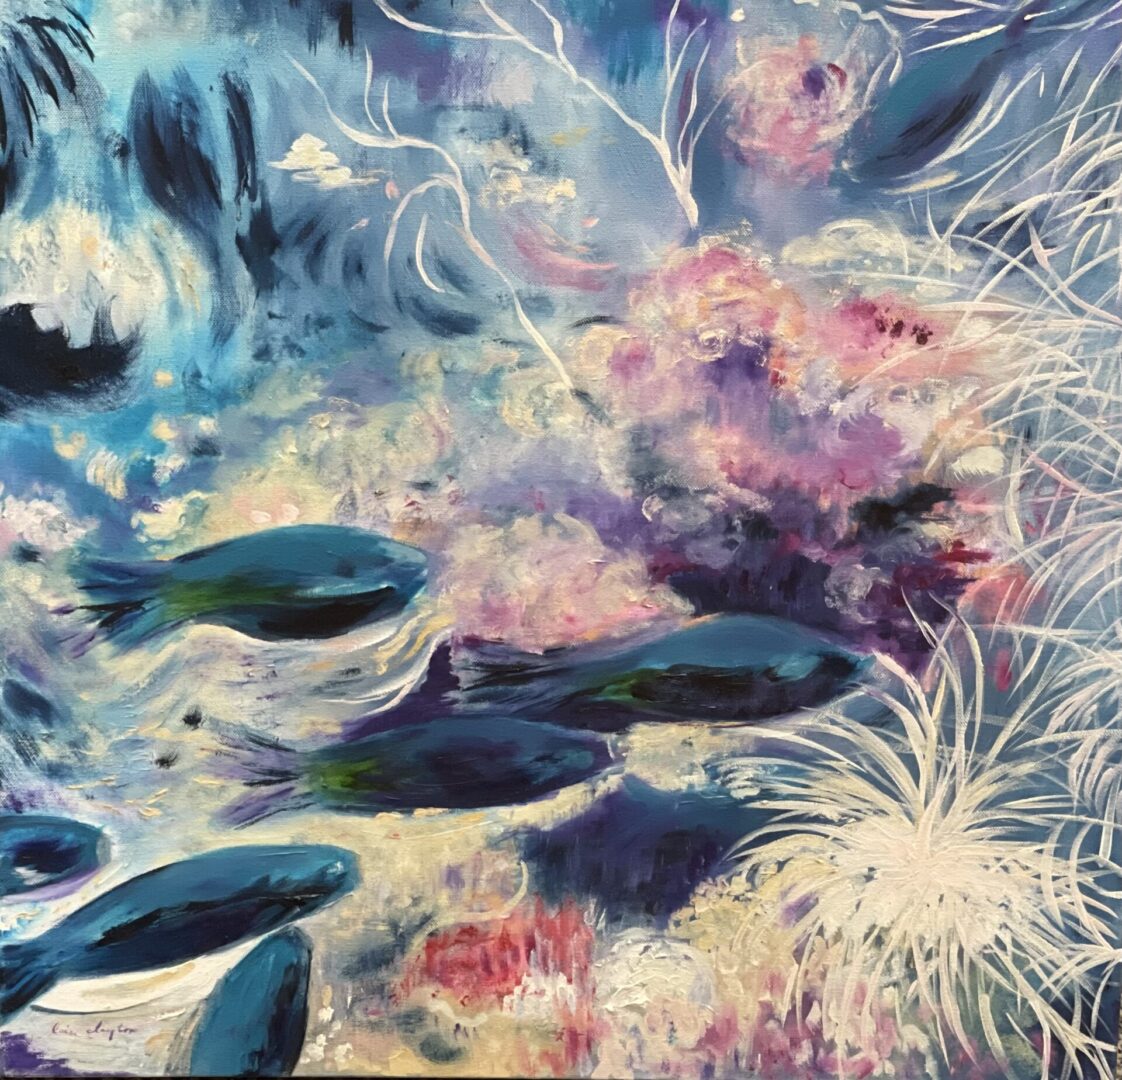 A painting of fish swimming in a blue and purple sea.